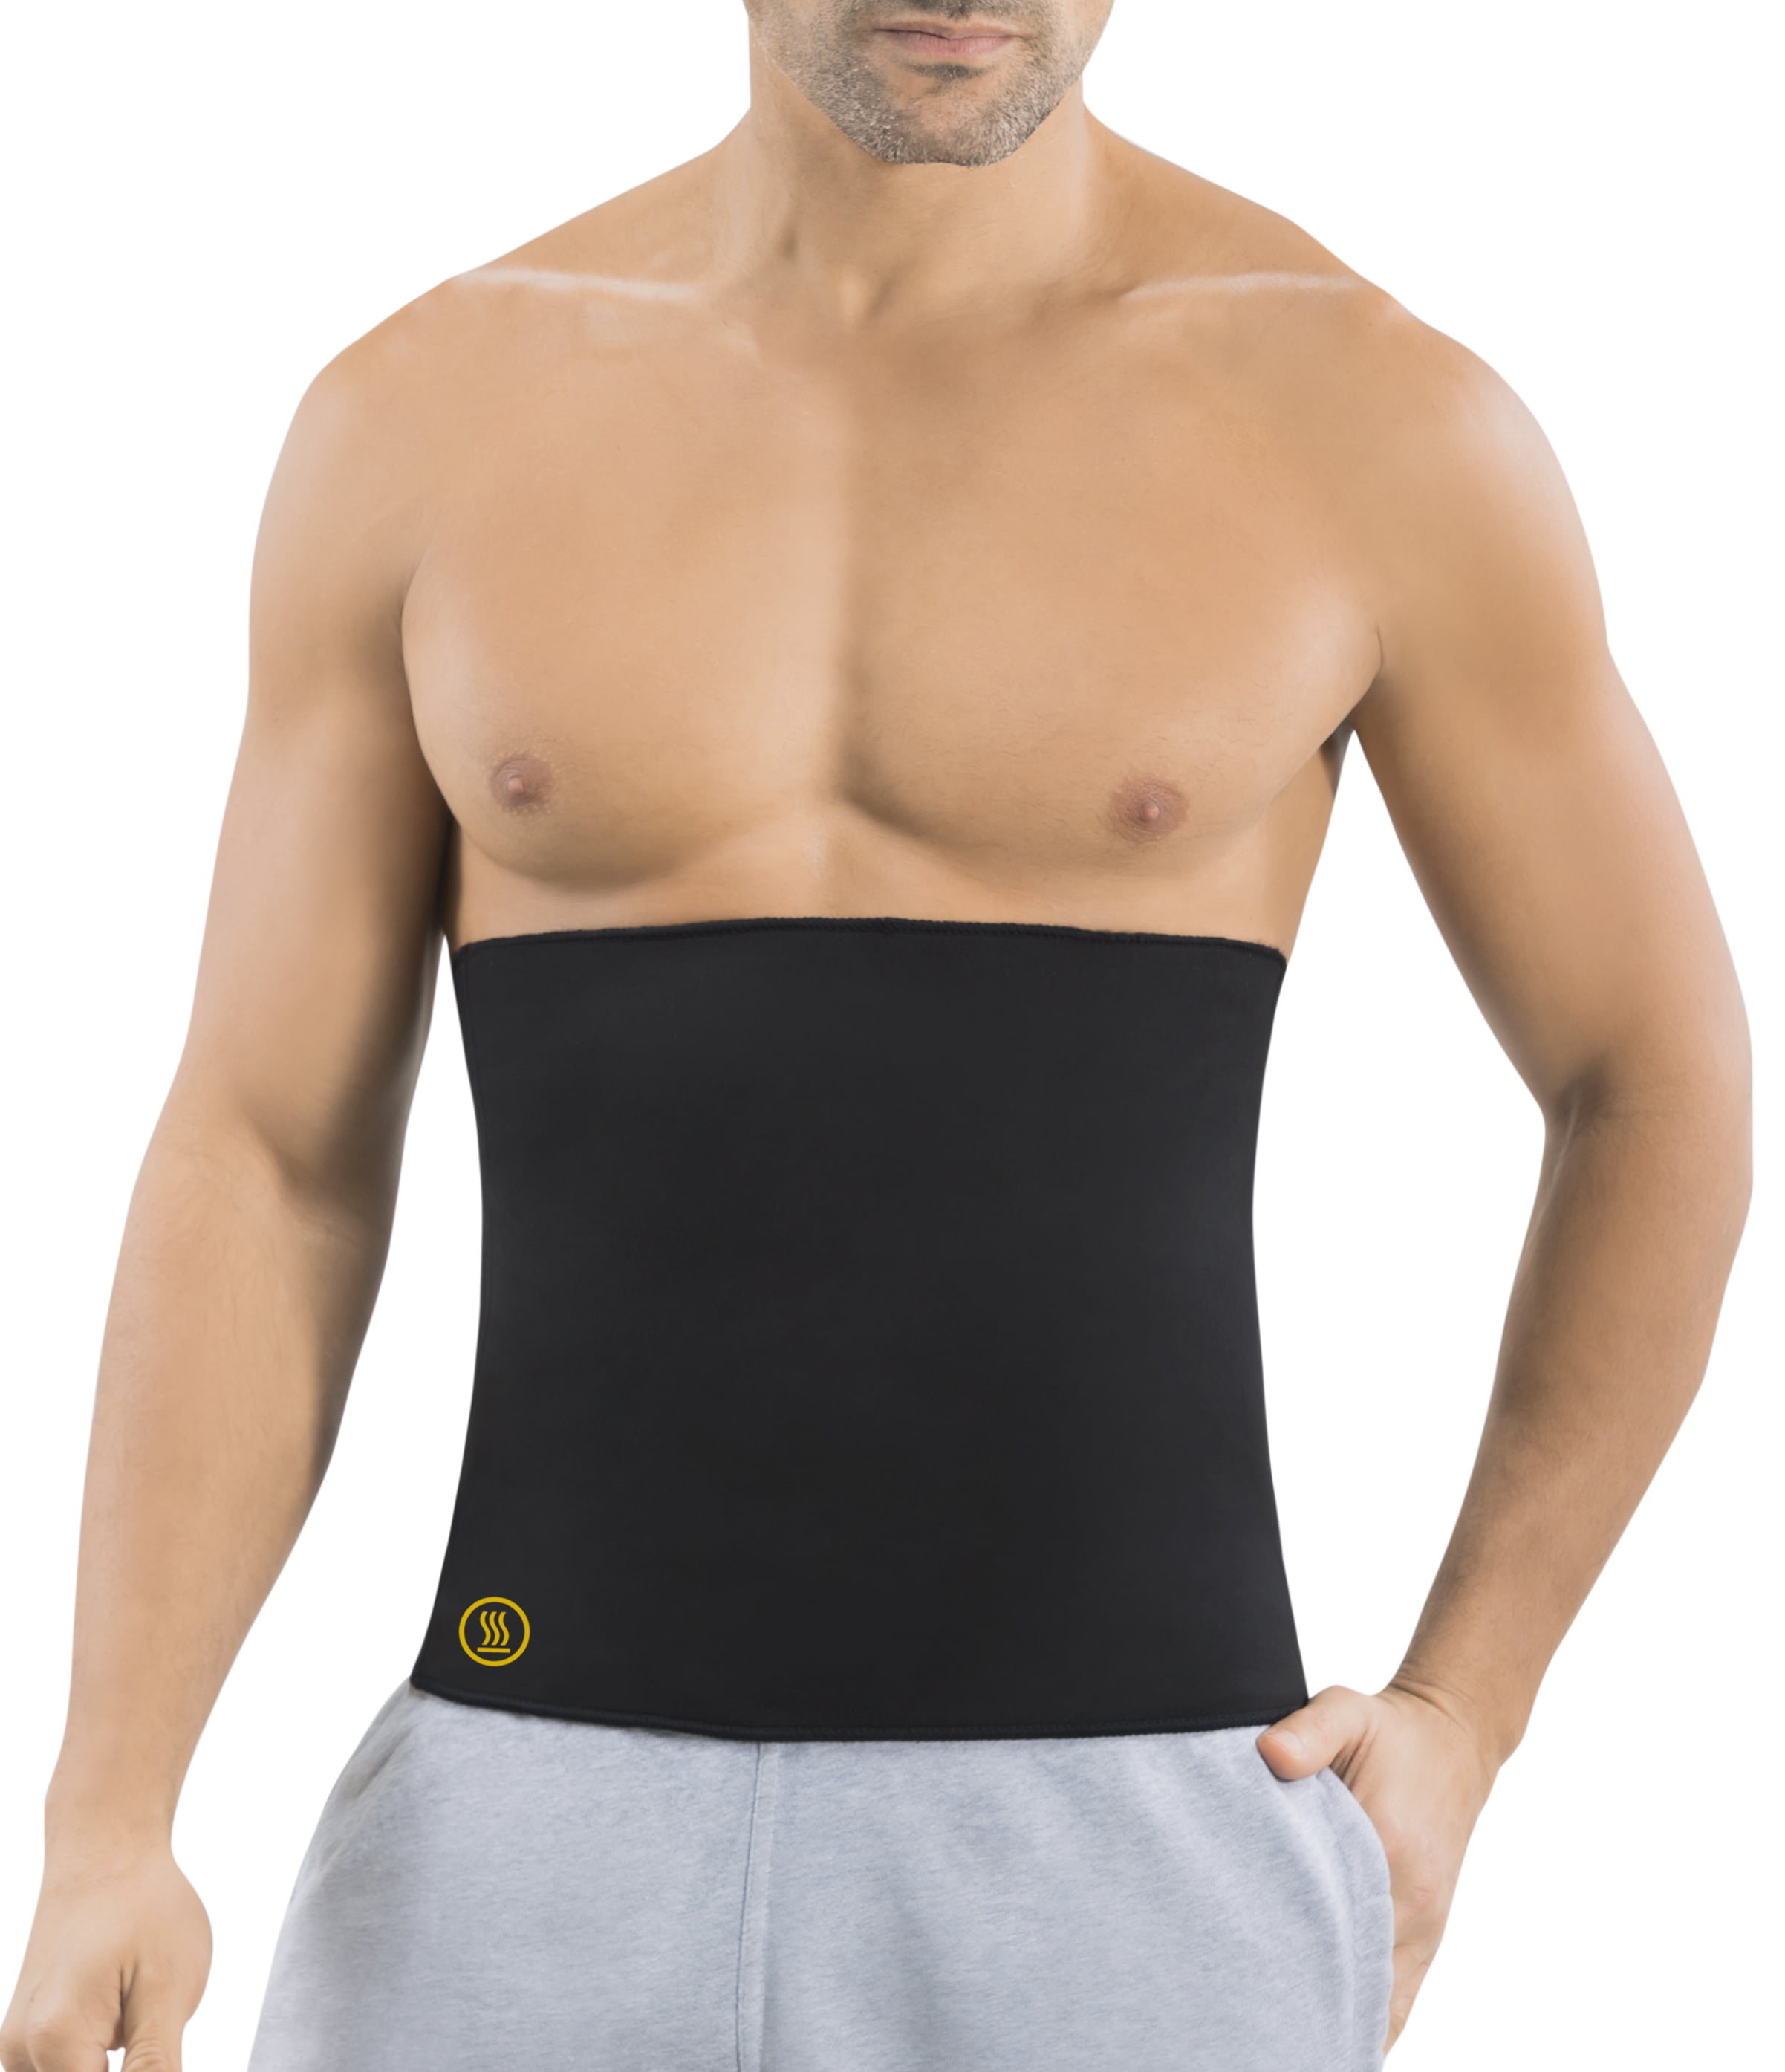 Hot Shapers Thermal Hot Belt for Men - Slimming Compression and